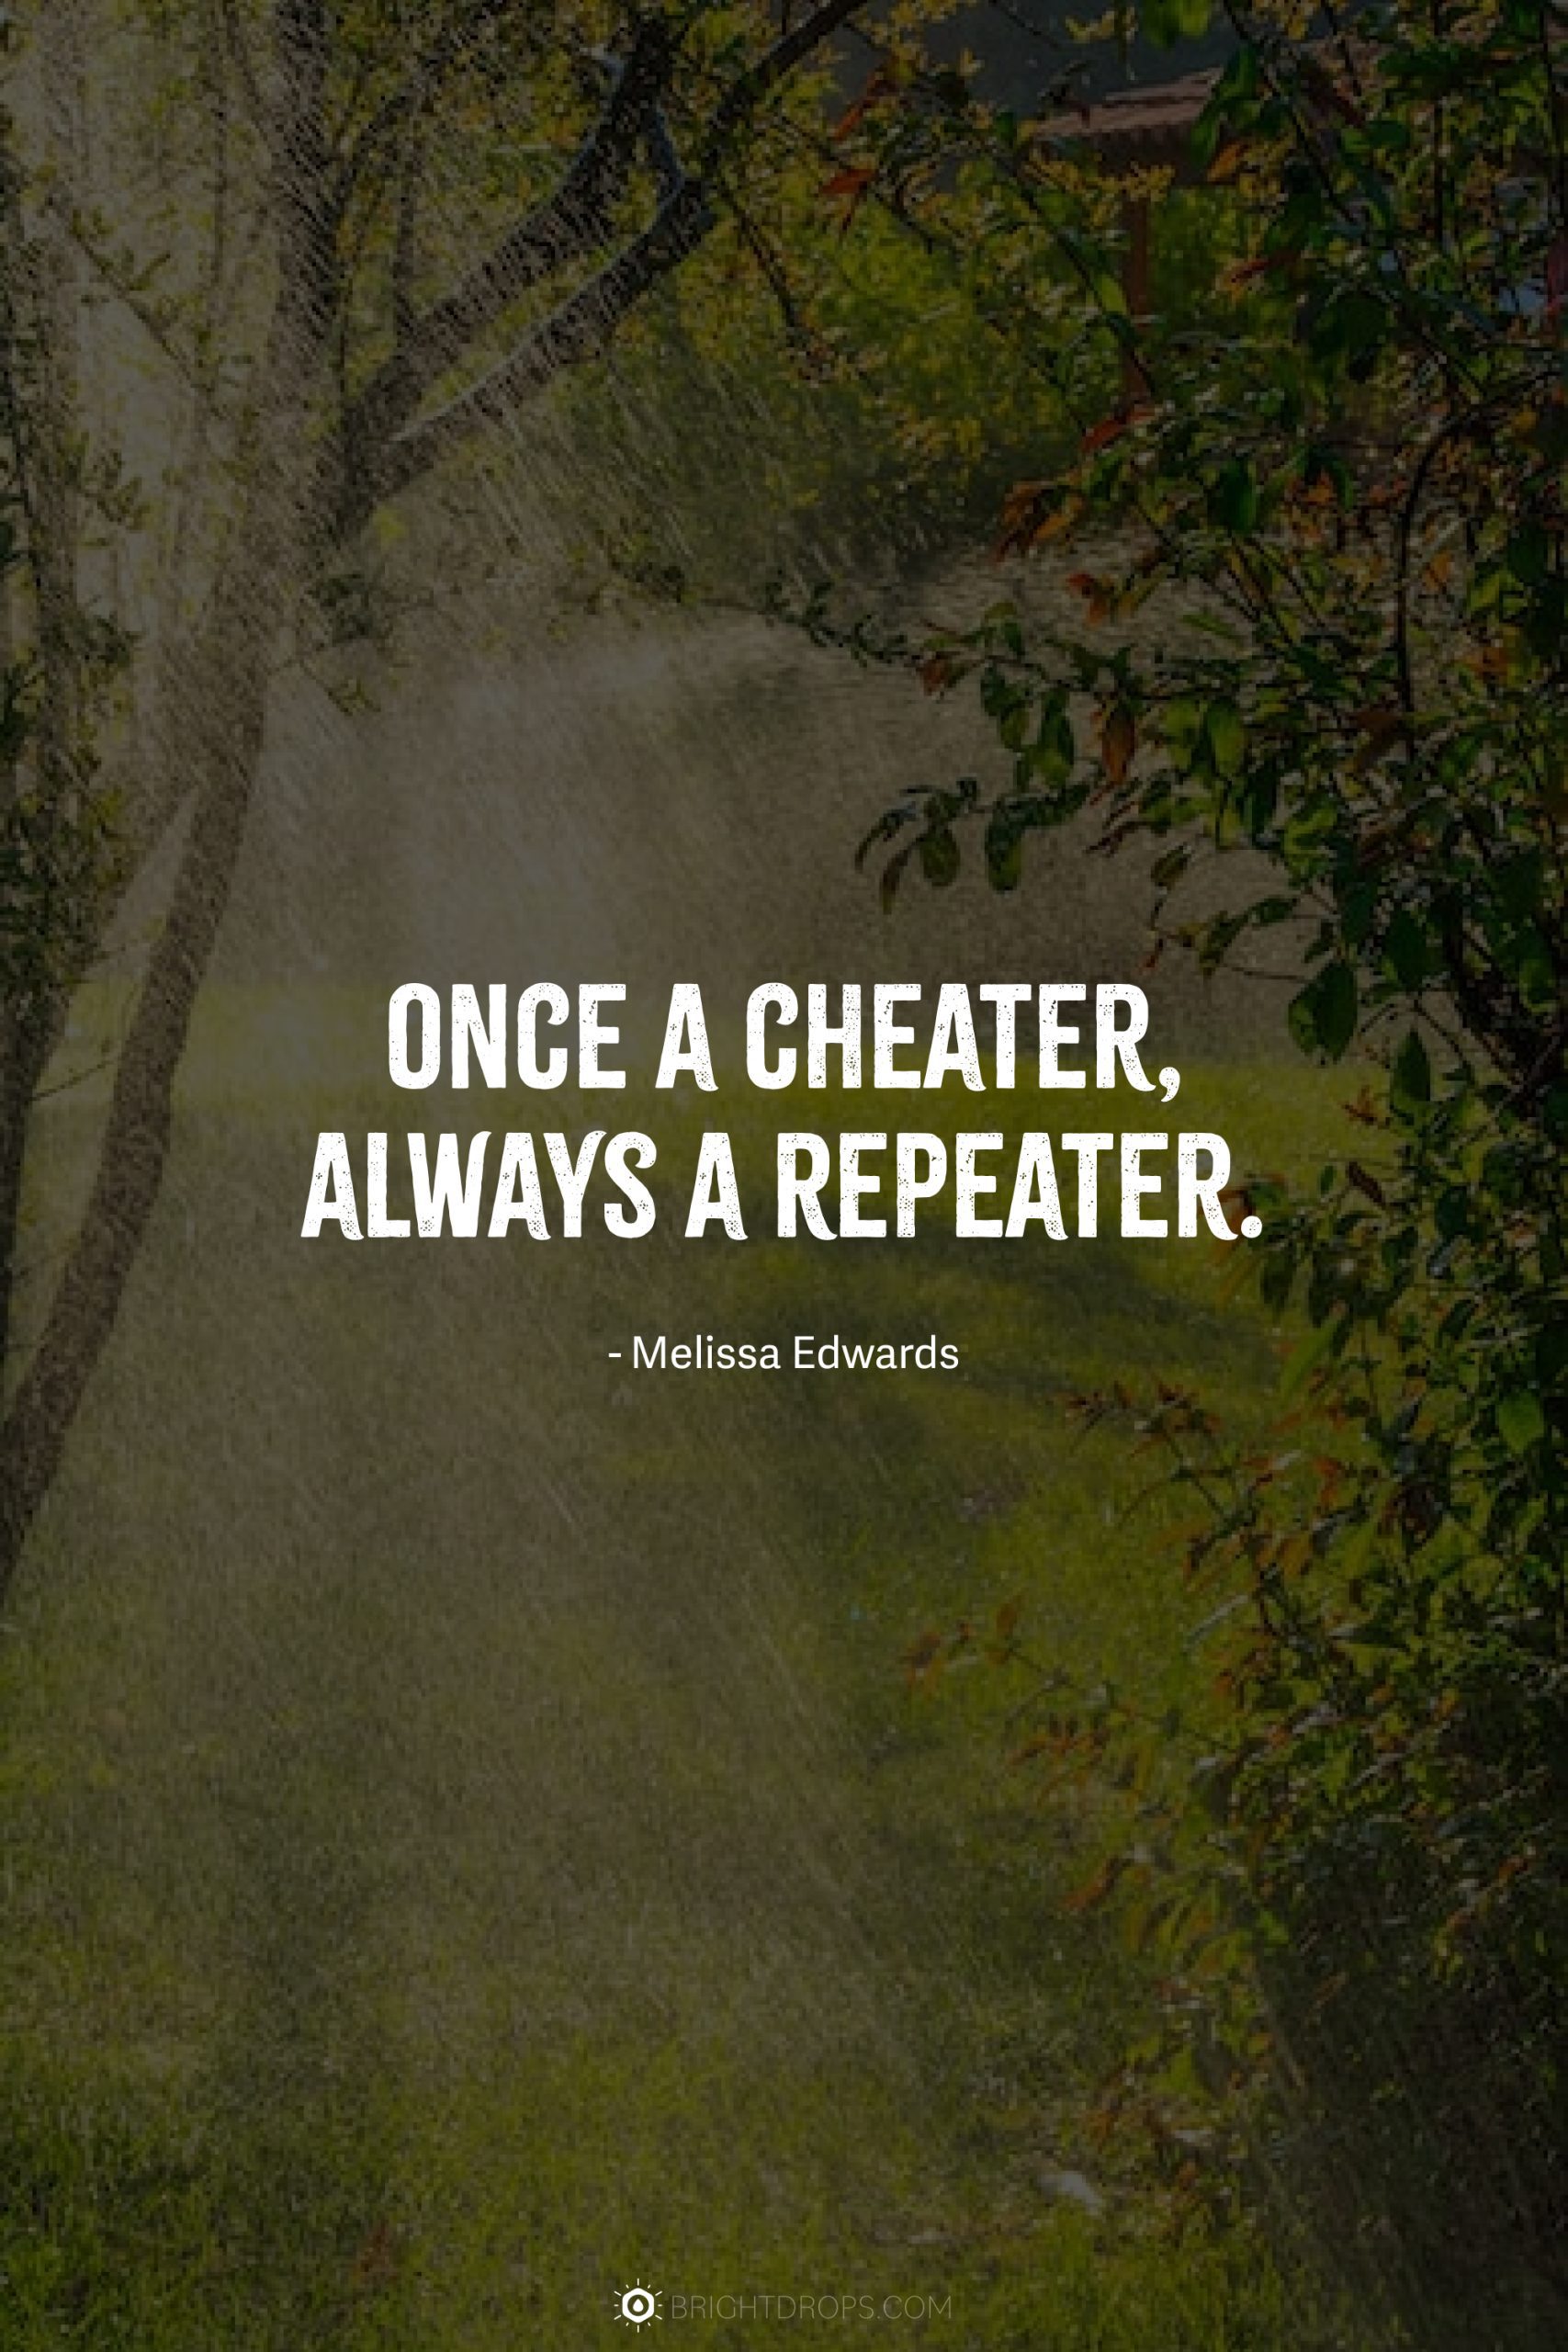 Once a cheater, always a repeater.